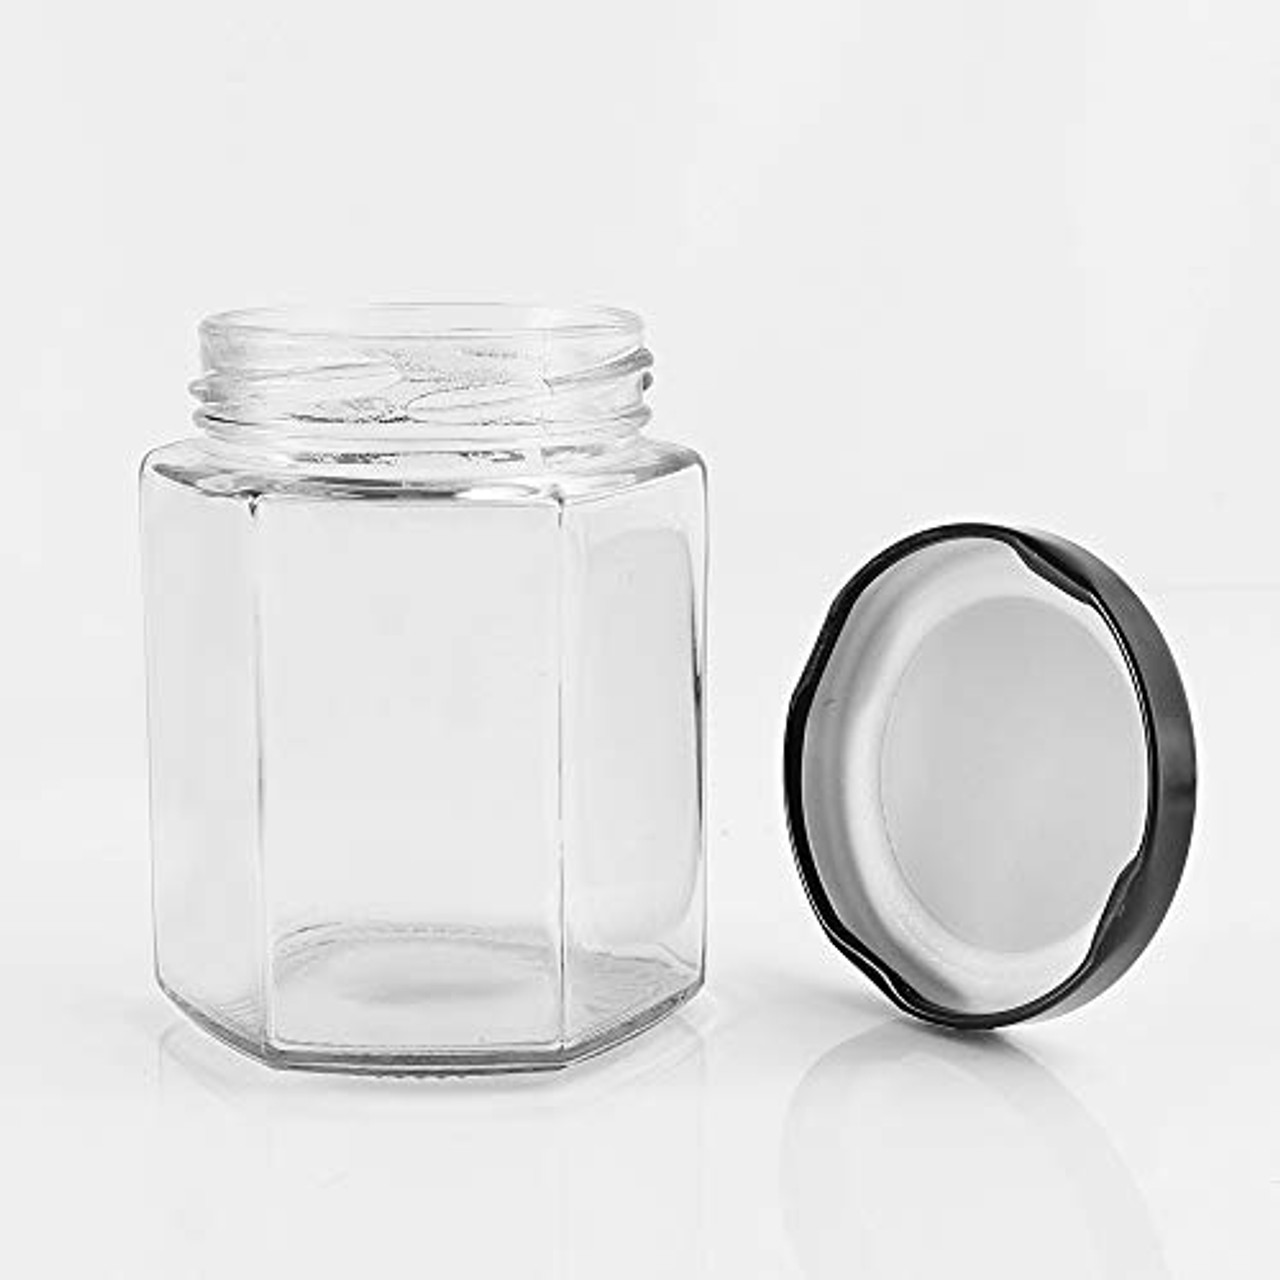  CycleMore 30 Pack 4oz Glass Spice Jars Bottles, Square